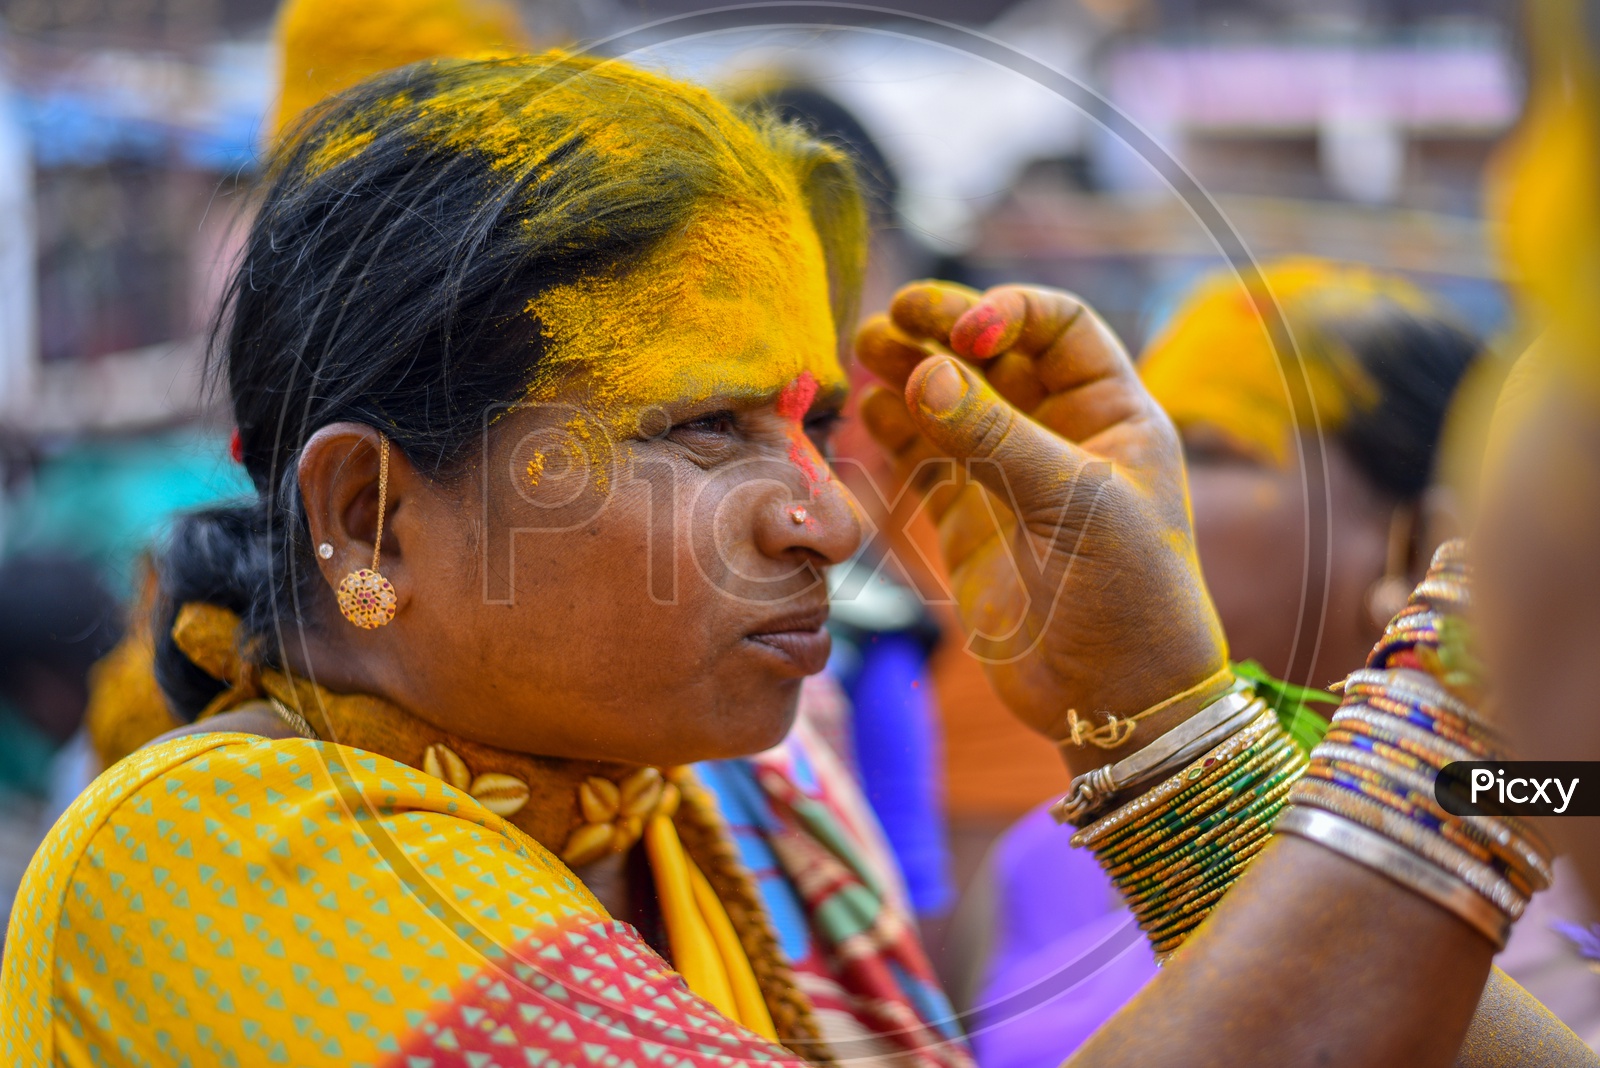 Woman Applying Vermilion To Their Foreheads As a Tradition  in Bonalu Festival